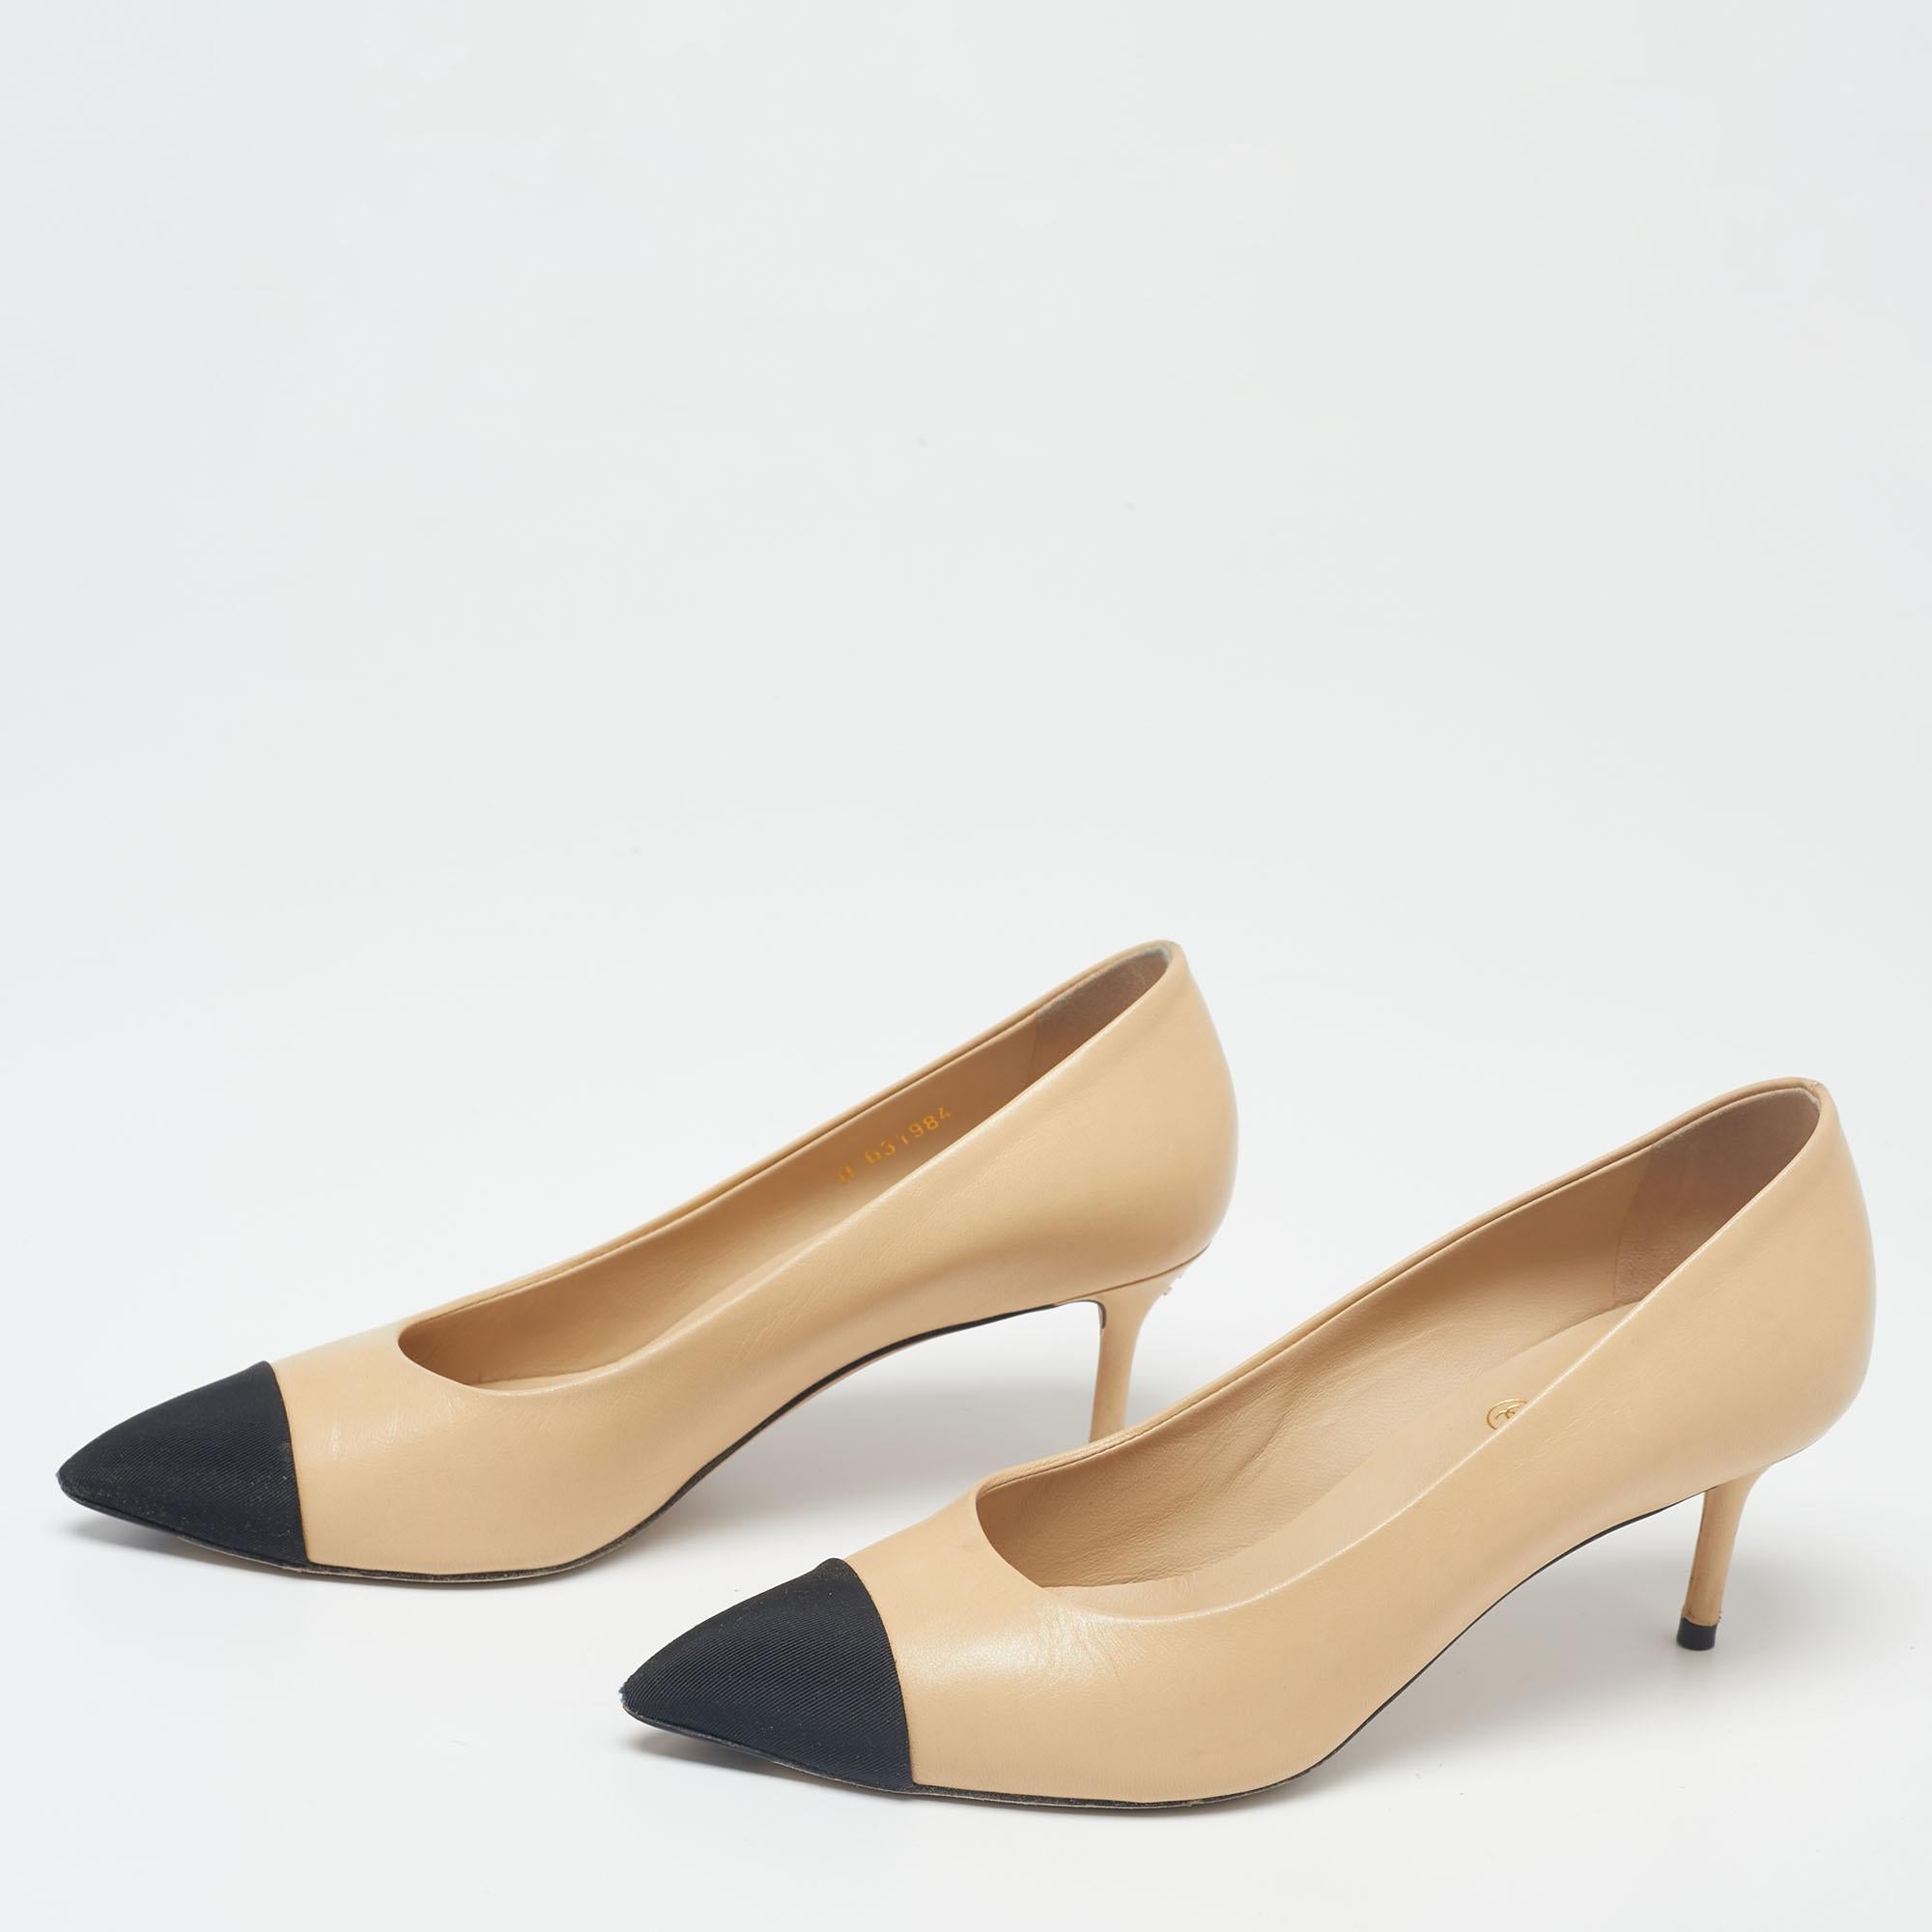 These black and beige pumps from the house of Chanel are truly elegant and poised. They are made from leather and fabric and showcase cap toes. They are made in a slip-on style with pointed toes. Wear them with formals as well as casuals!